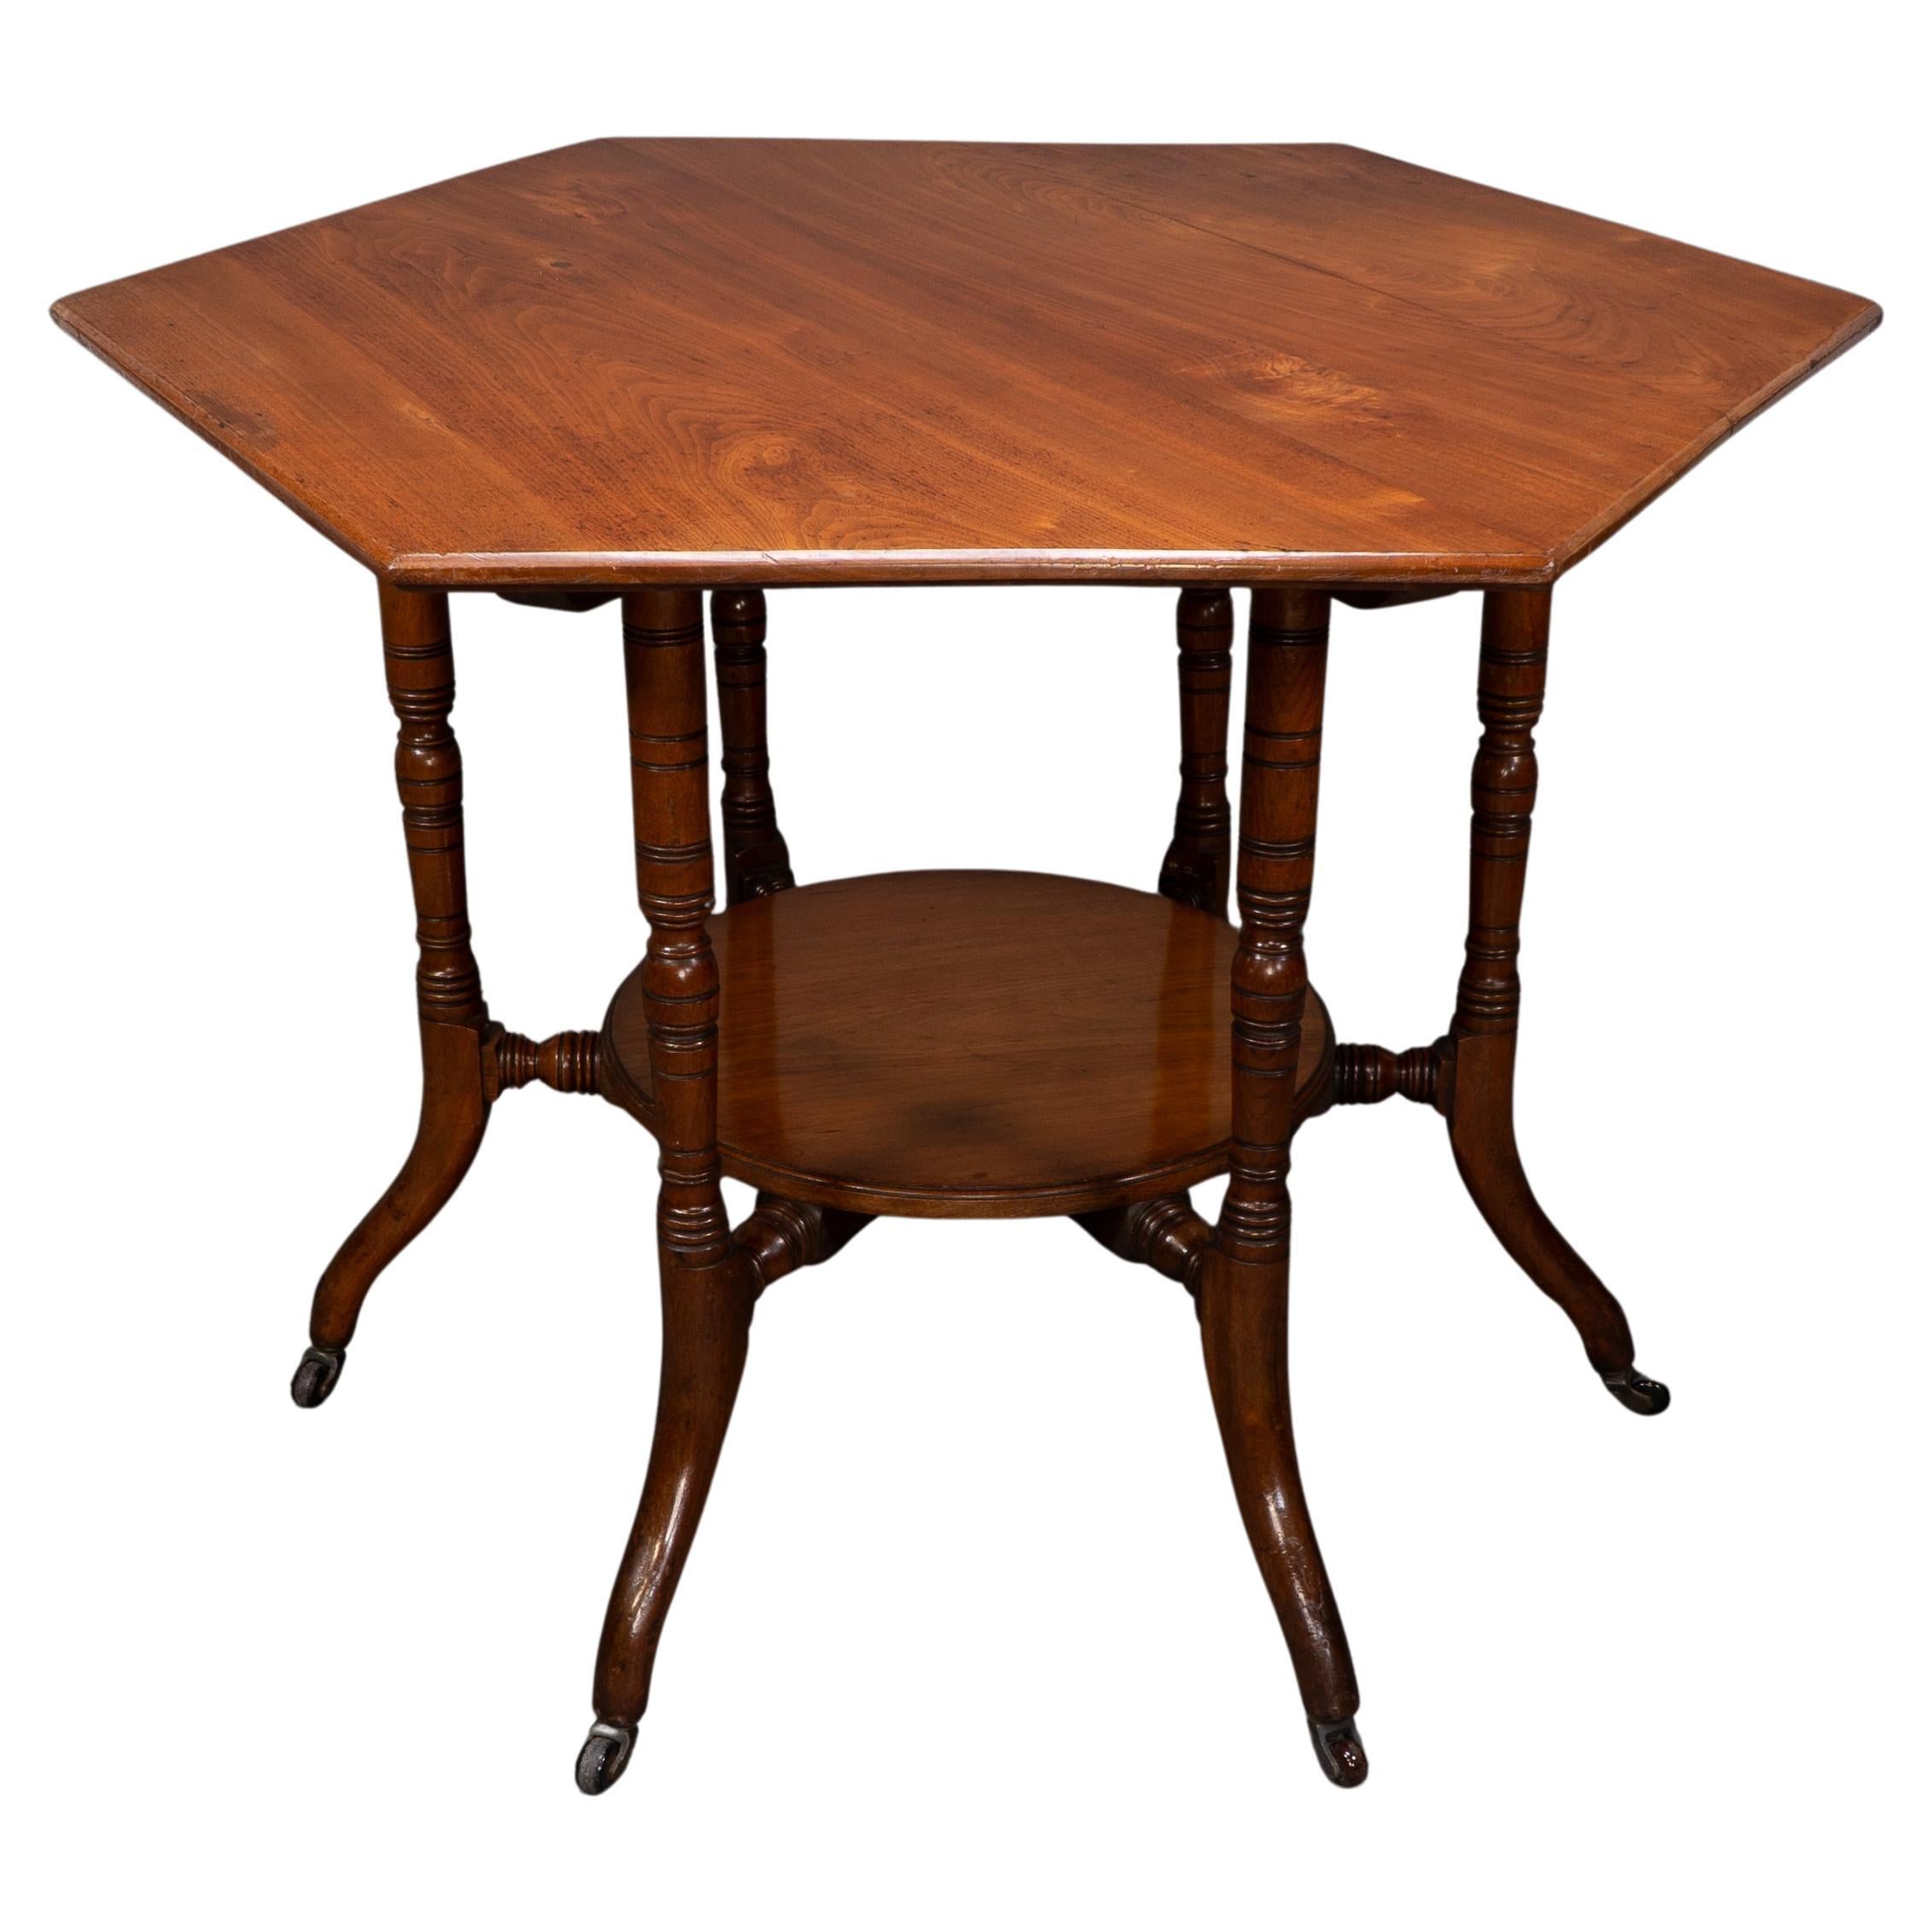 Collinson & Lock attributed. An Aesthetic Movement walnut octagonal center table For Sale